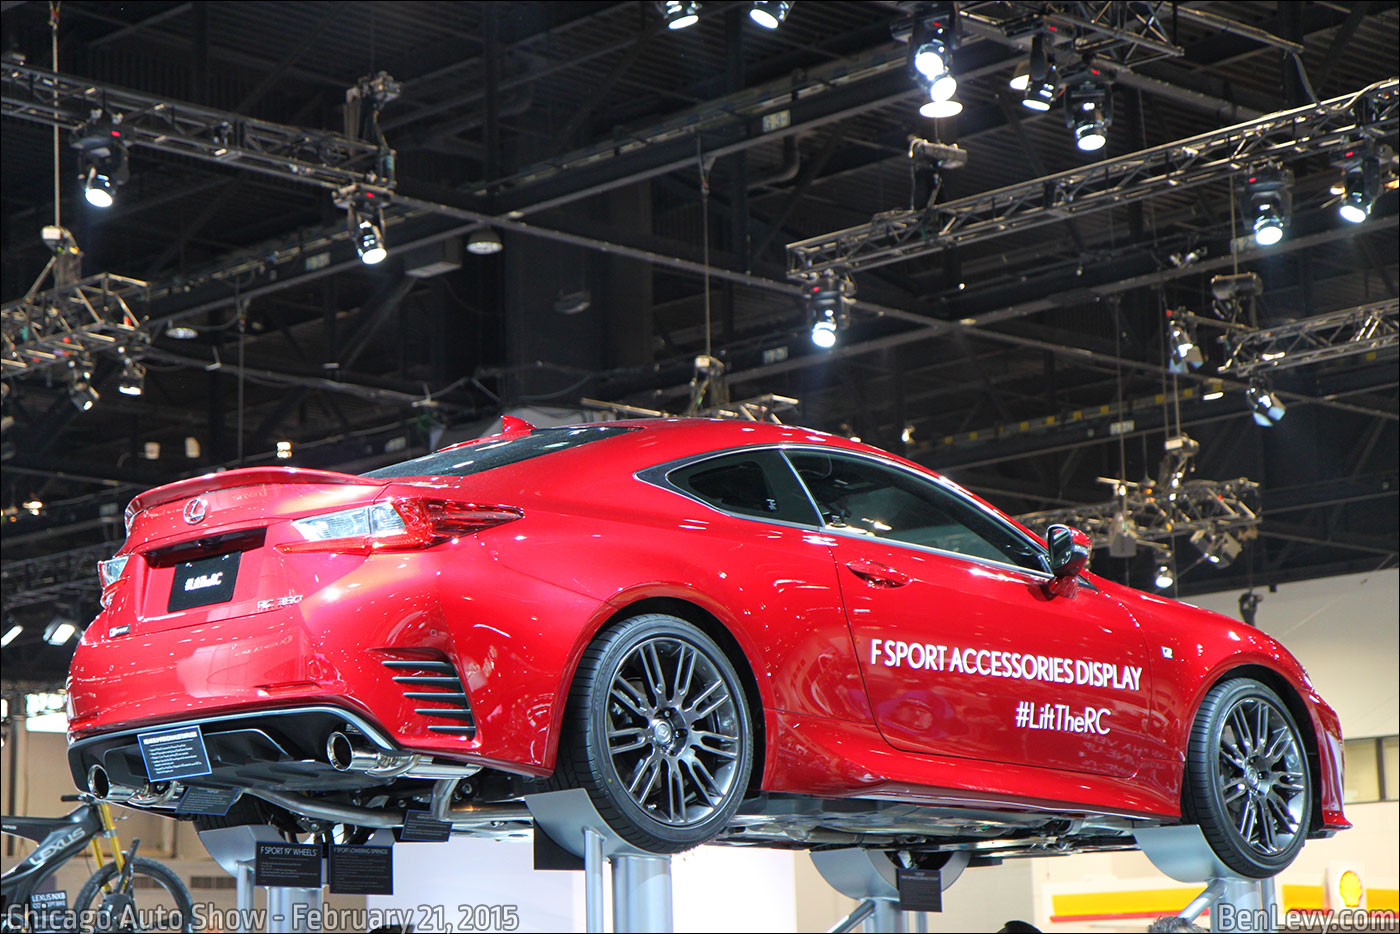 Lexus IS F Sport Accessories display at the Chicago Auto Show